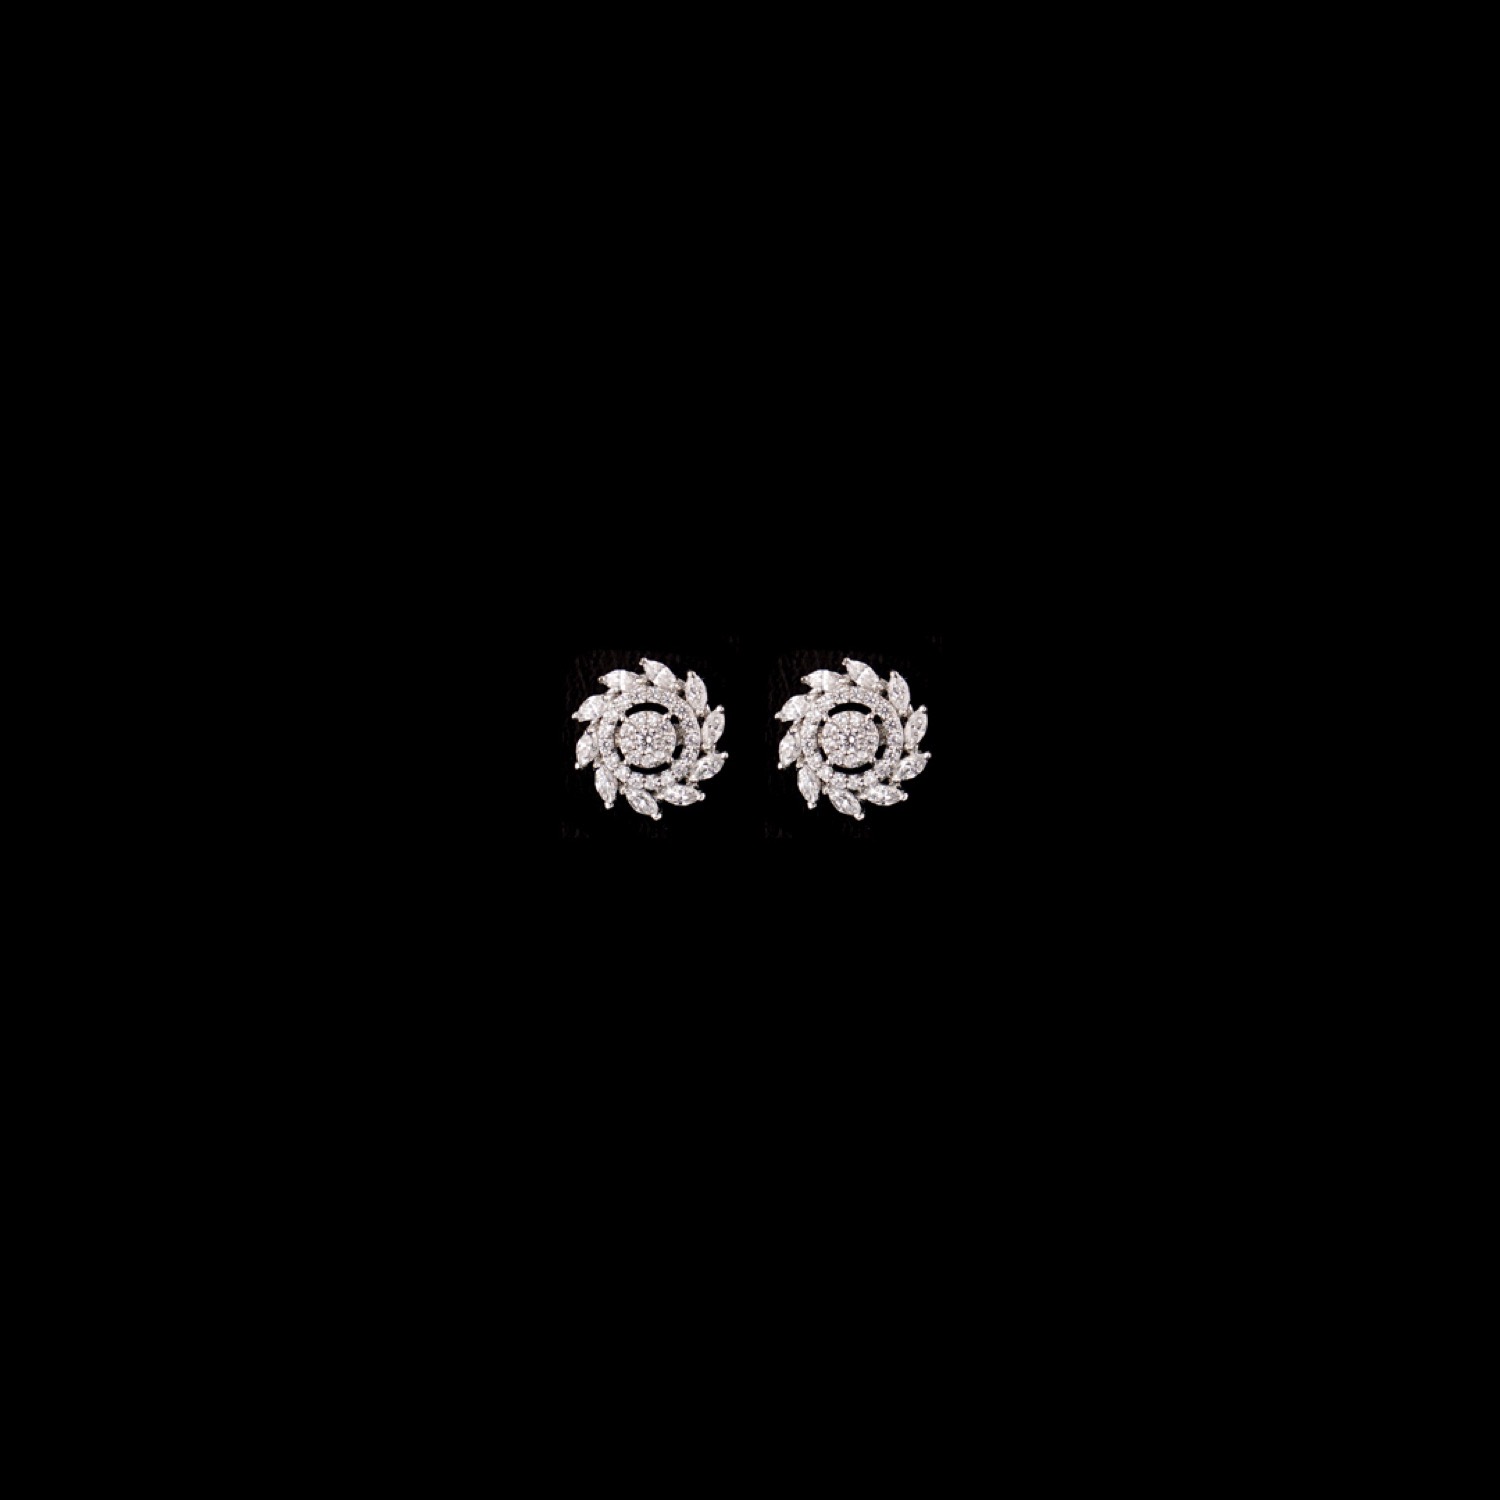 varam_earrings_102022_marquise_and_round_cut_stone_flower_shaped_silver_earrings-1